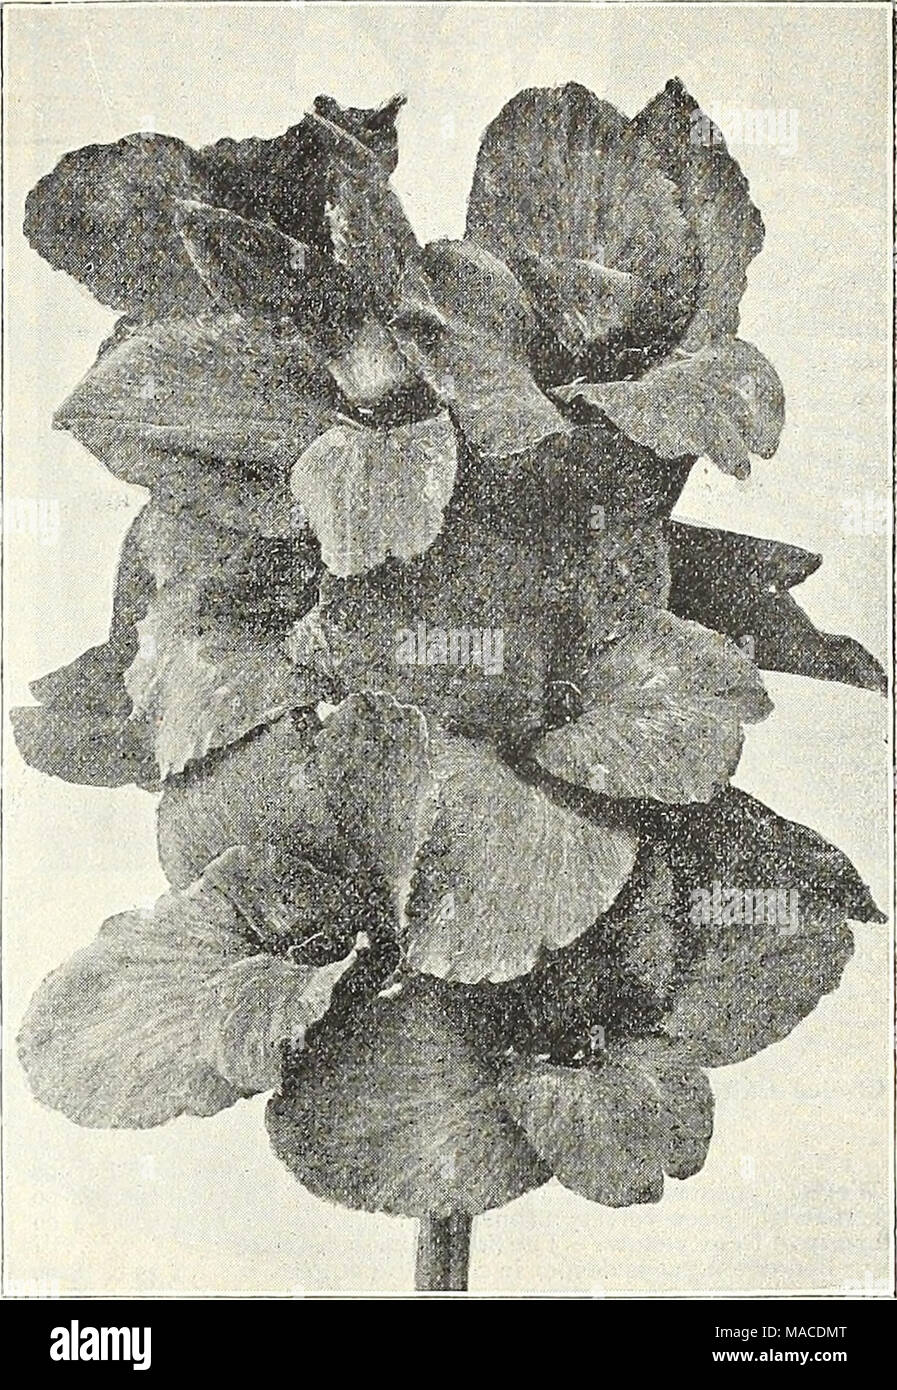 . Dreer's wholesale price list : seeds for florists plants vegetable seeds, tools, fertilizers, sundries, etc . ORCHID-FLOWERED CANNA, KING HUMBERT (offered on page I 8) New Carnations of 1907âContinued. Bonnie Maid. Edged white, shading to a pink centre, similar to Prosperity. $1.00 per doz.; $6.00 per ioo; $50.00 per 1000. Imperial. A fine variegated variety ; exceptionally strong grower. $1.00 per doz.; $6.00 per 100 , $50.00 per ioco. Pink Imperial. A beautiful pink sort of Imperial. $1.00 per doz.; $0.00 per ioo ; $50.00 per 1000. Red Riding Hood. Clear shade of scarlet; clean grower. $1. Stock Photo